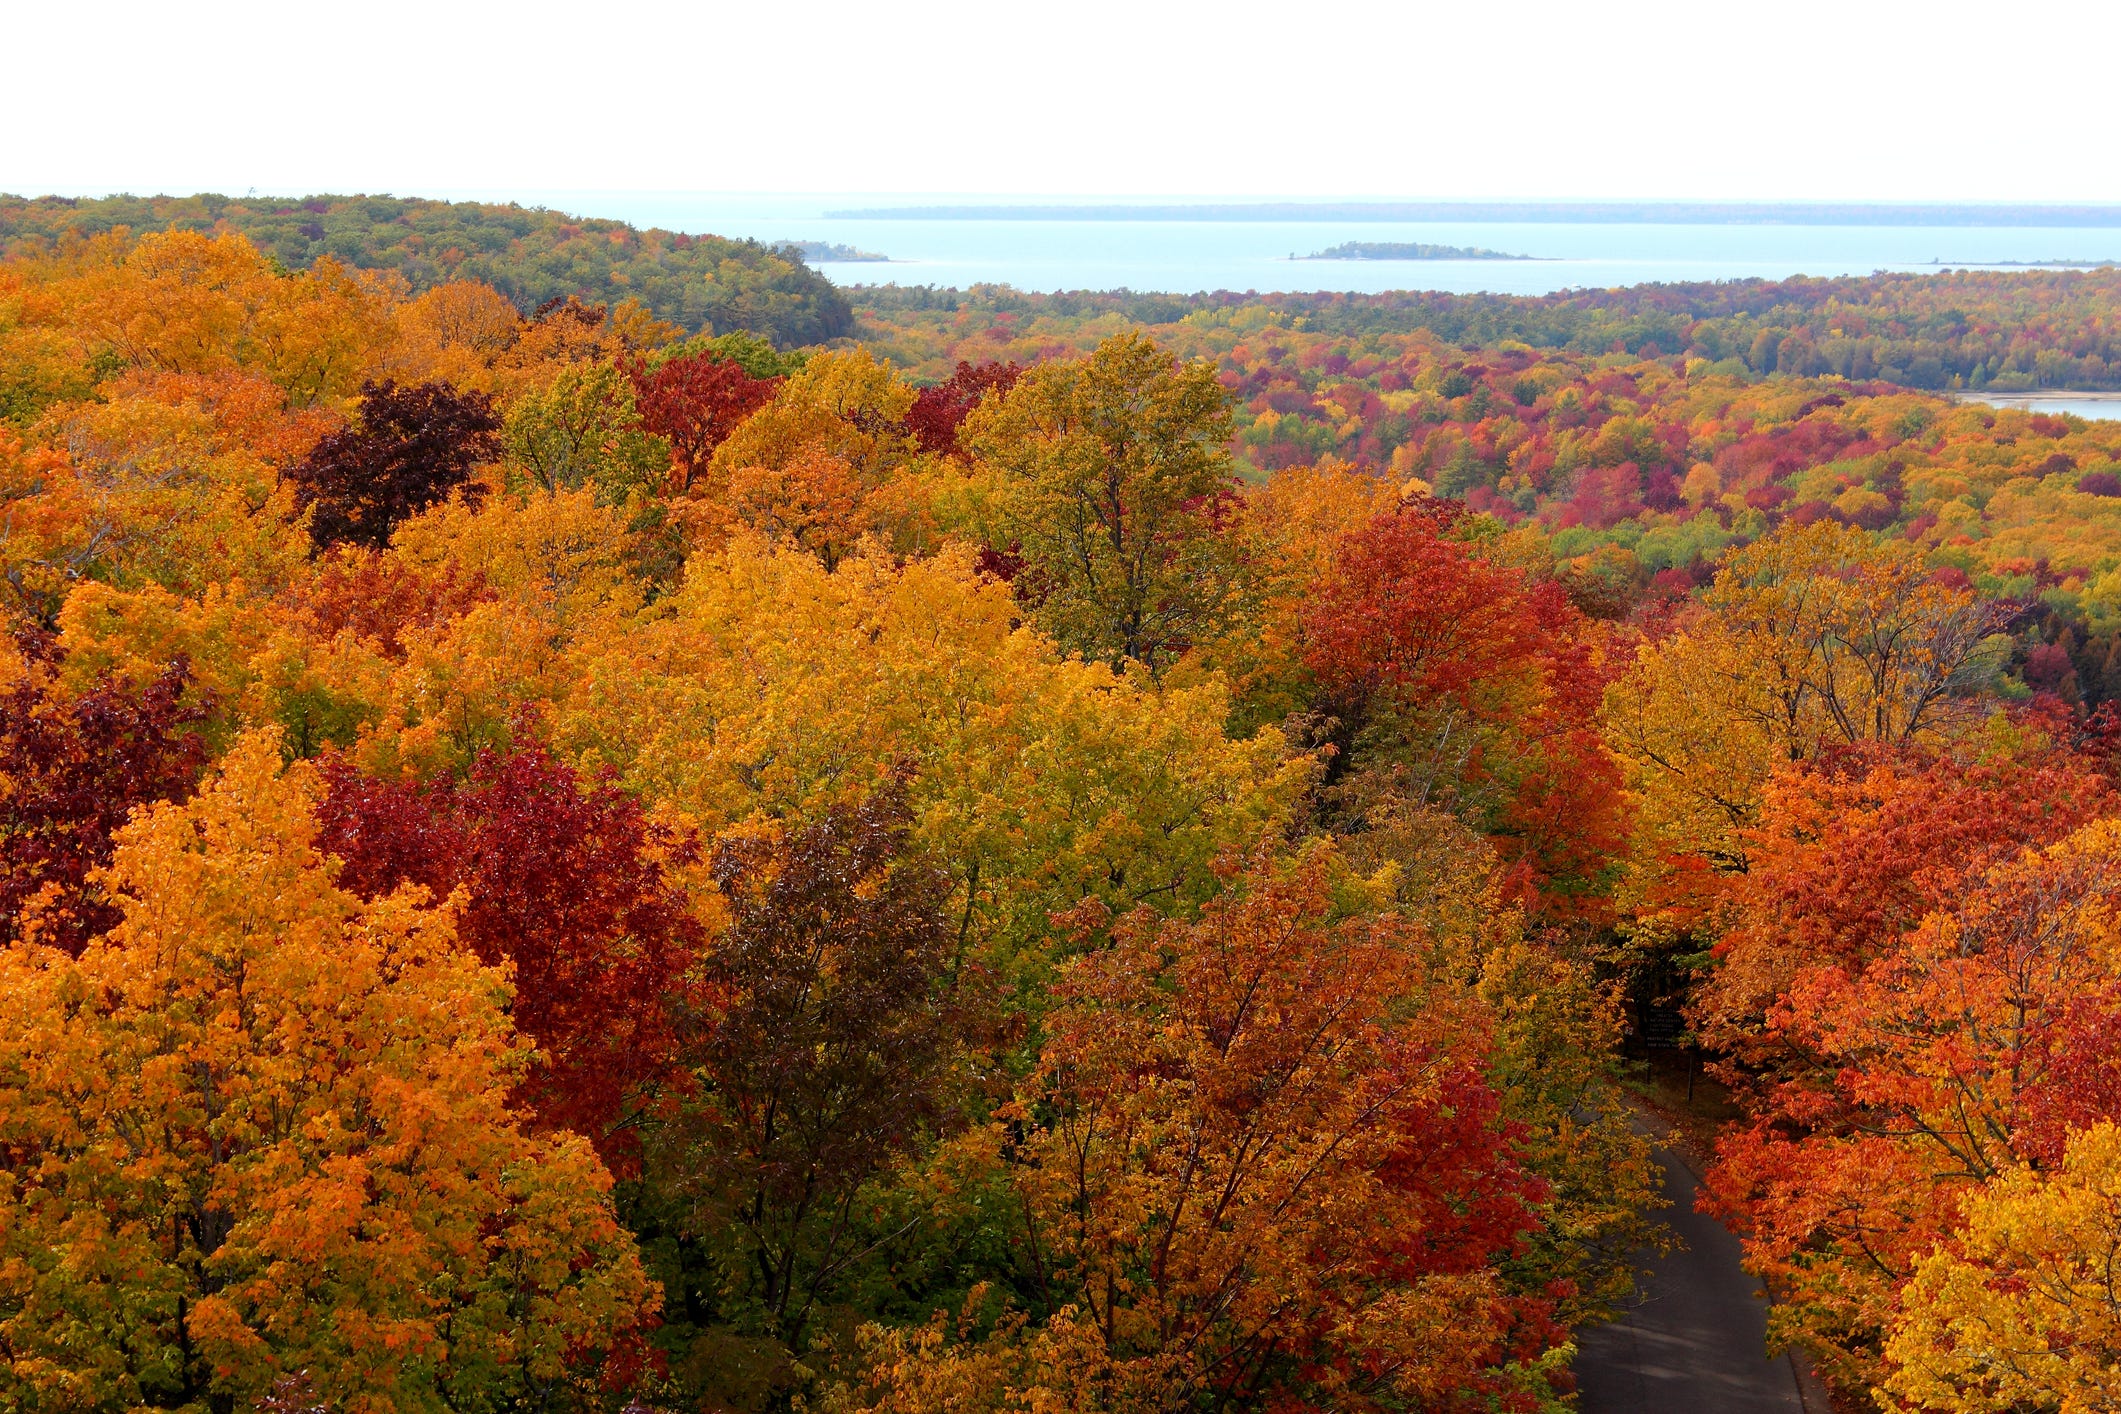 <p>Door County was named the best destination for fall foliage in 2019 by <a href="https://www.10best.com/awards/travel/best-destination-for-fall-foliage-2019/">USA Today</a>, and one of the 10 best places to see fall foliage without the crowds by <a href="https://www.tripstodiscover.com/best-places-to-see-fall-foliage-without-the-crowds/">Trips to Discover</a>.</p>